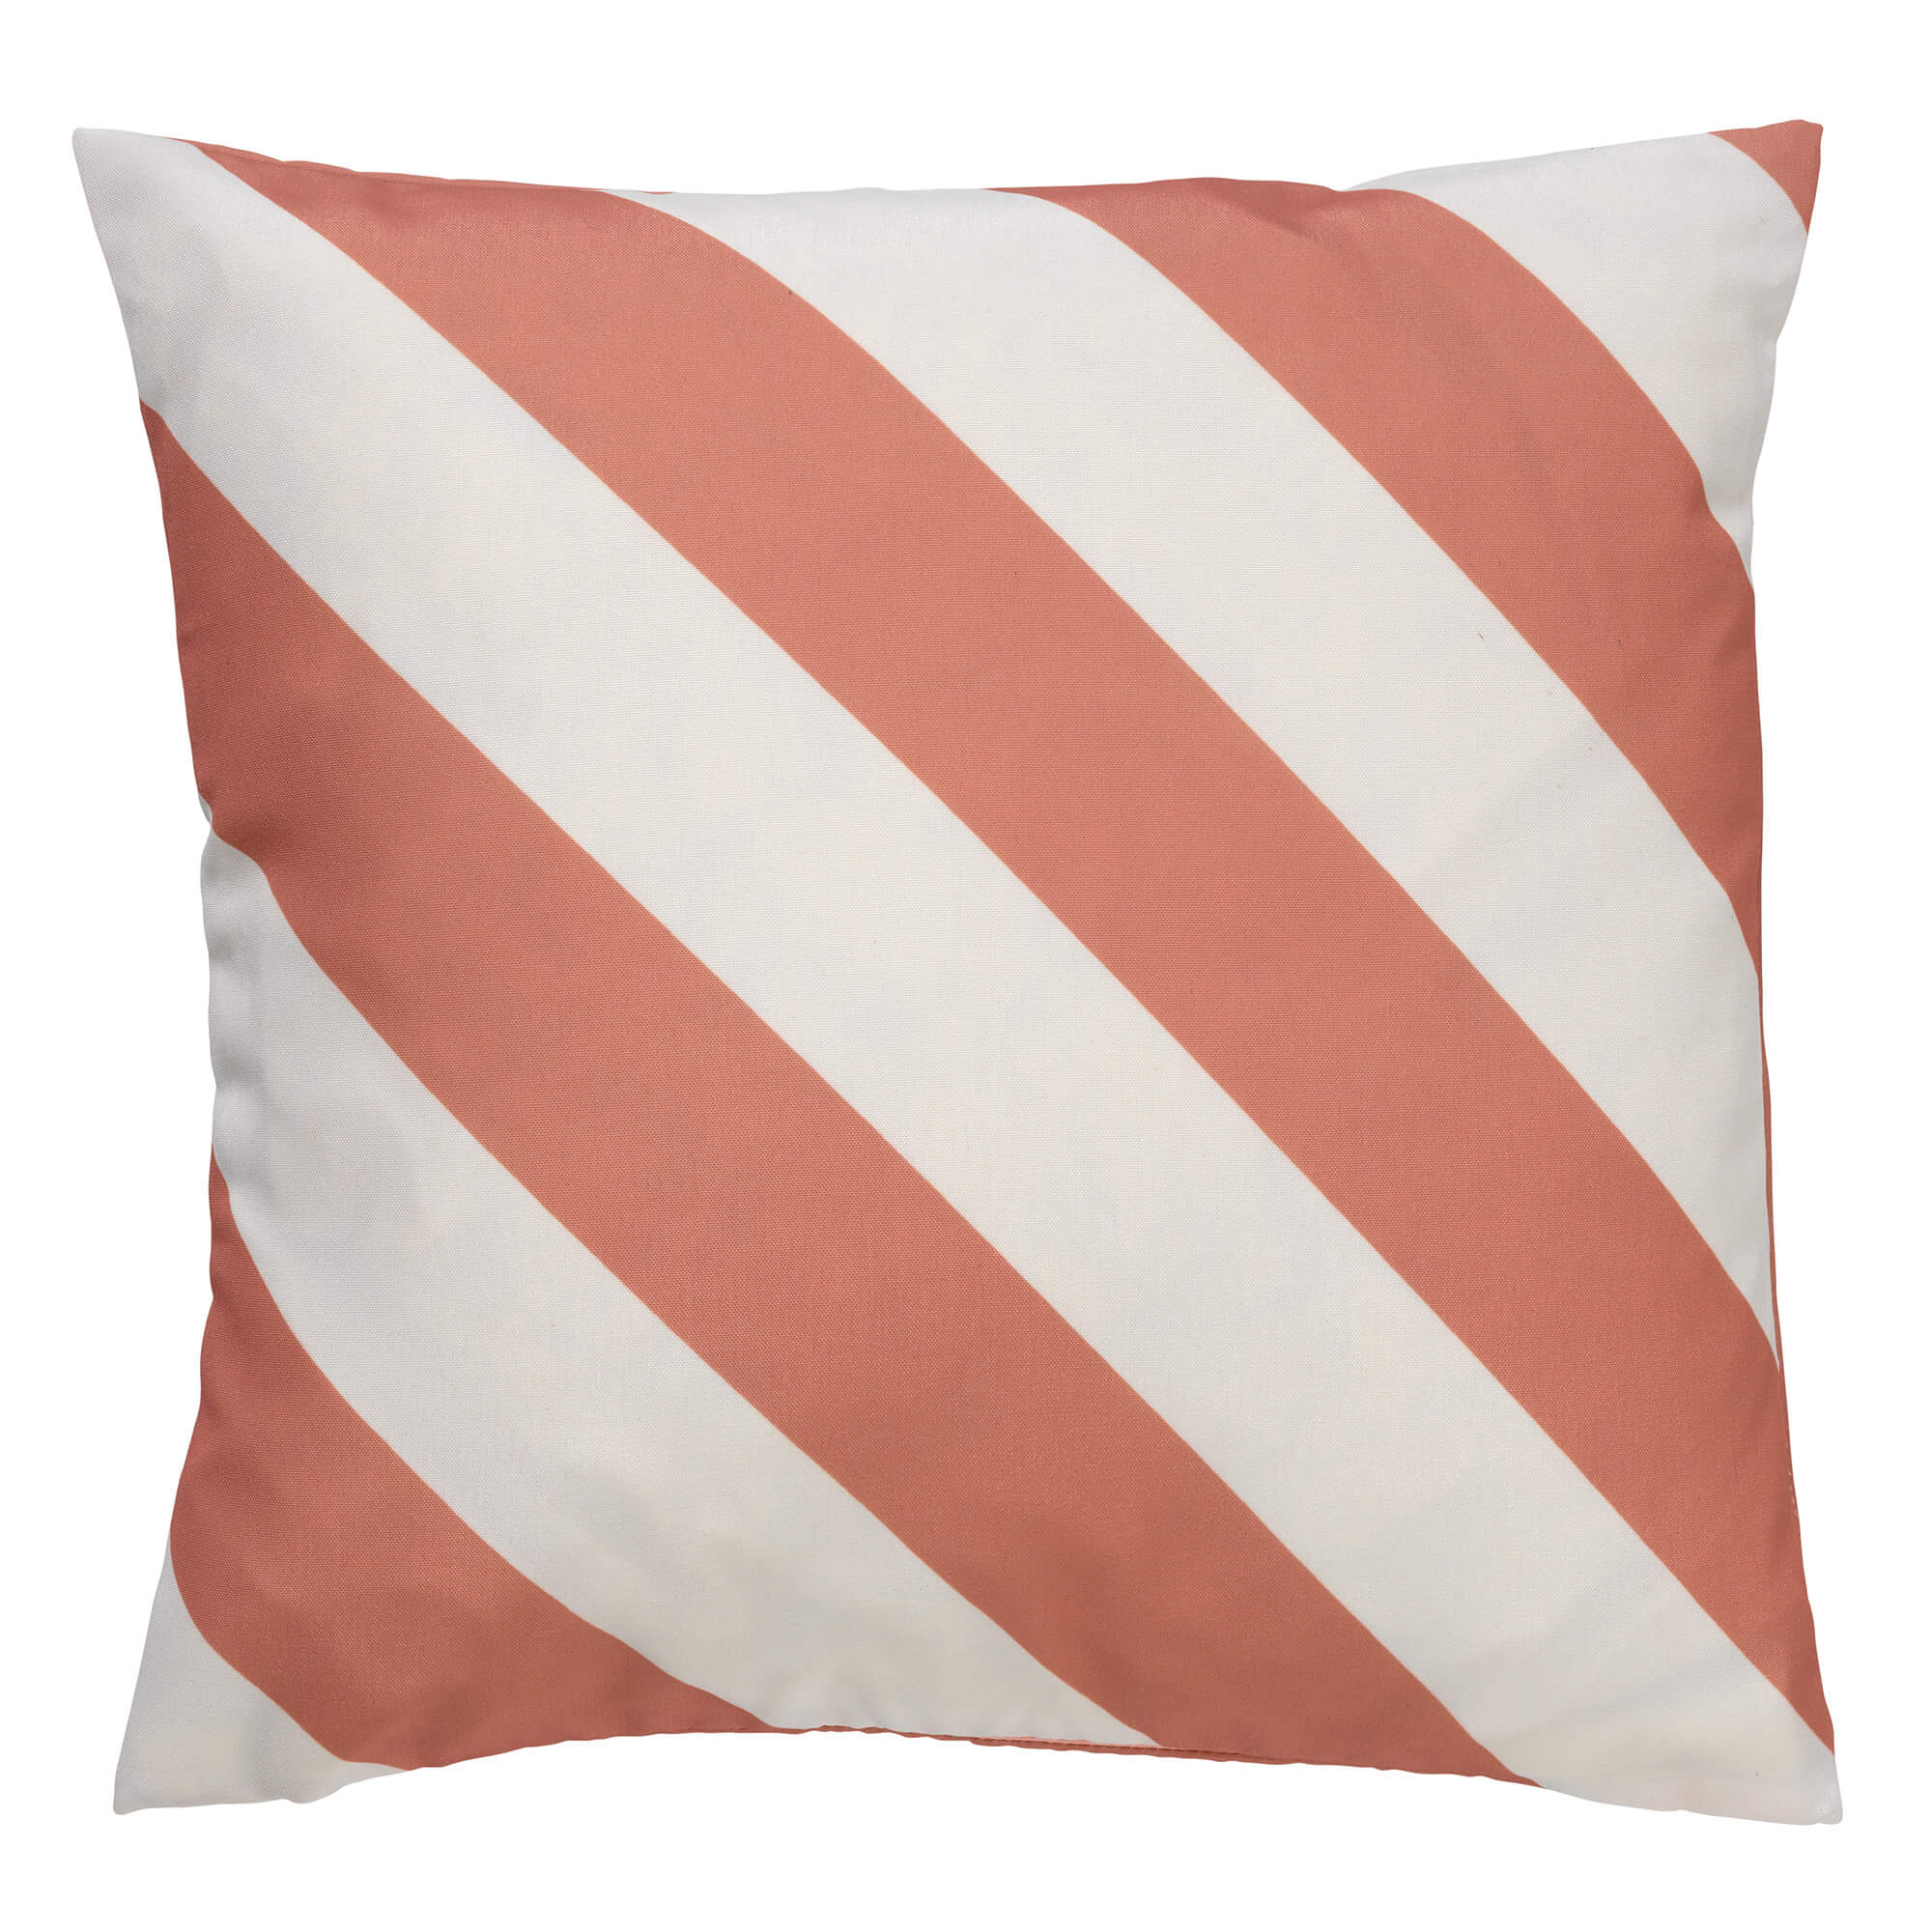 SANZENO - Outdoor Cushion 45x45 cm - water repellent and UV-resistant - Muted Clay - pink